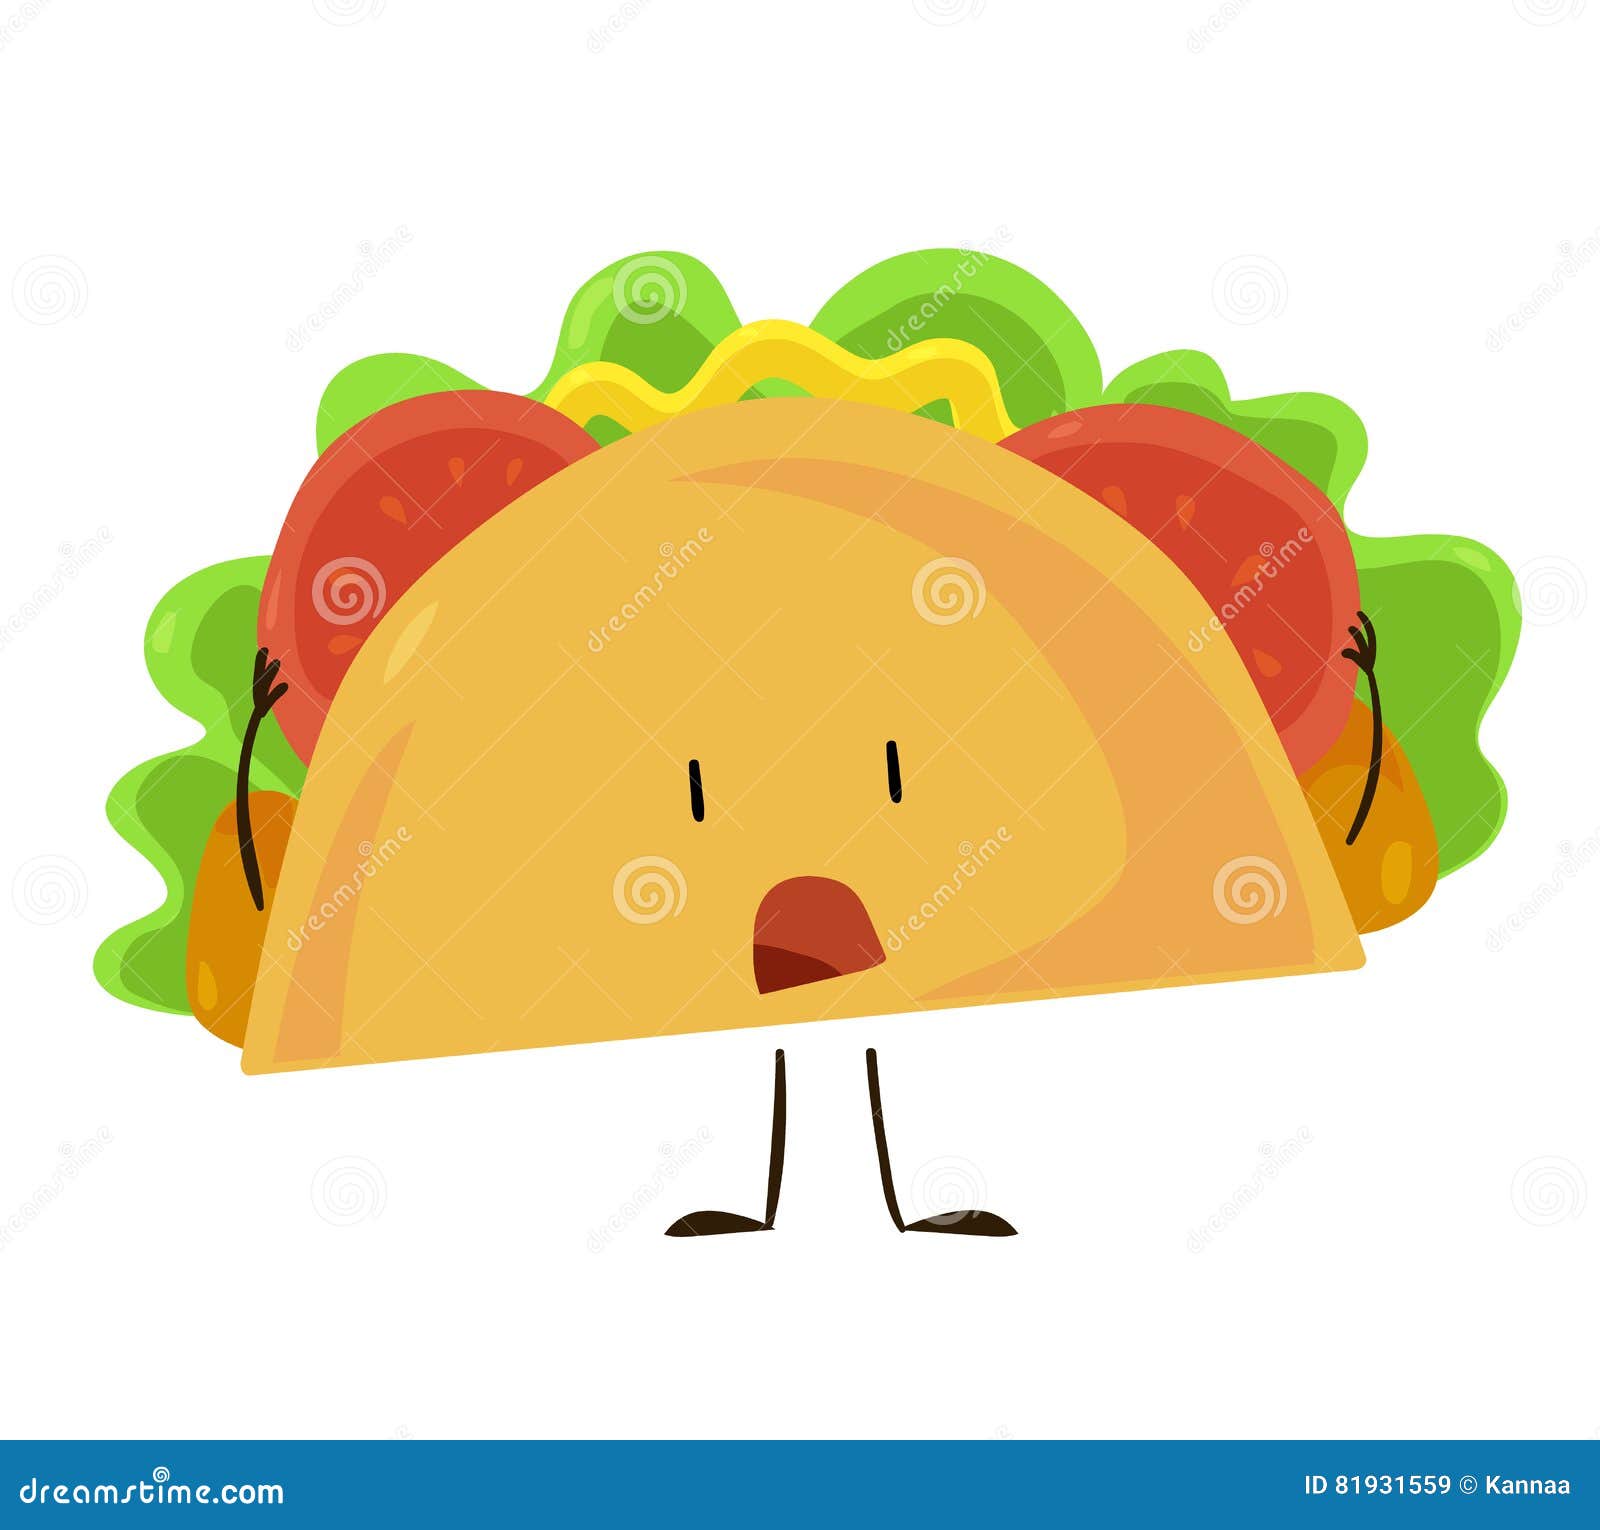 Funny fast food taco icon stock vector. Illustration of cooking - 81931559